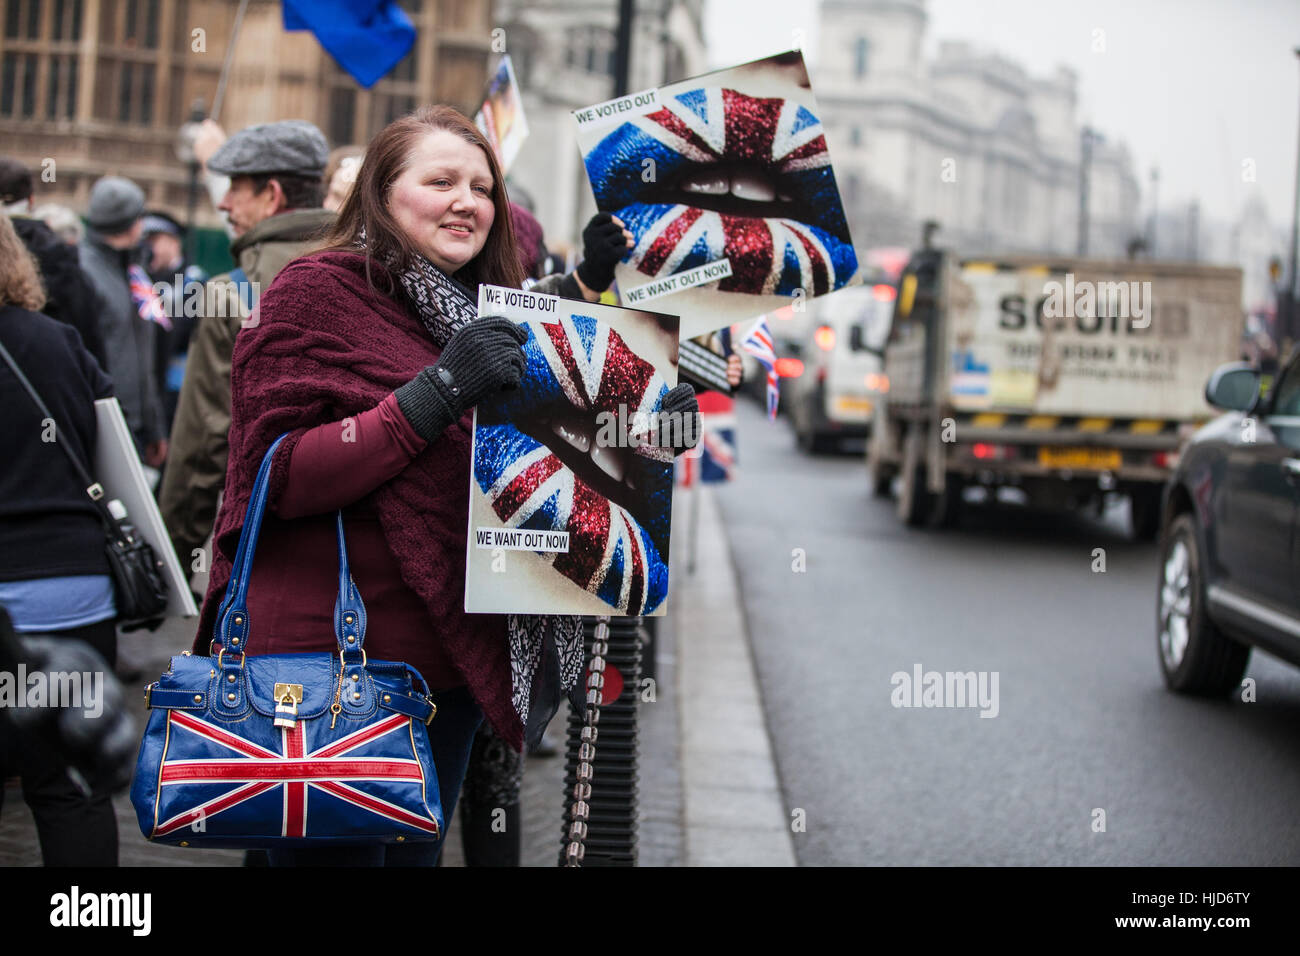 London, UK. 23rd January, 2017. Pro-Brexit campaigners attend a 'Brexit Peaceful Loud and Proud' rally organised by UKIP outside Parliament. Campaigners intend to ensure that the EU Referendum vote is implemented. Credit: Mark Kerrison/Alamy Live News Stock Photo